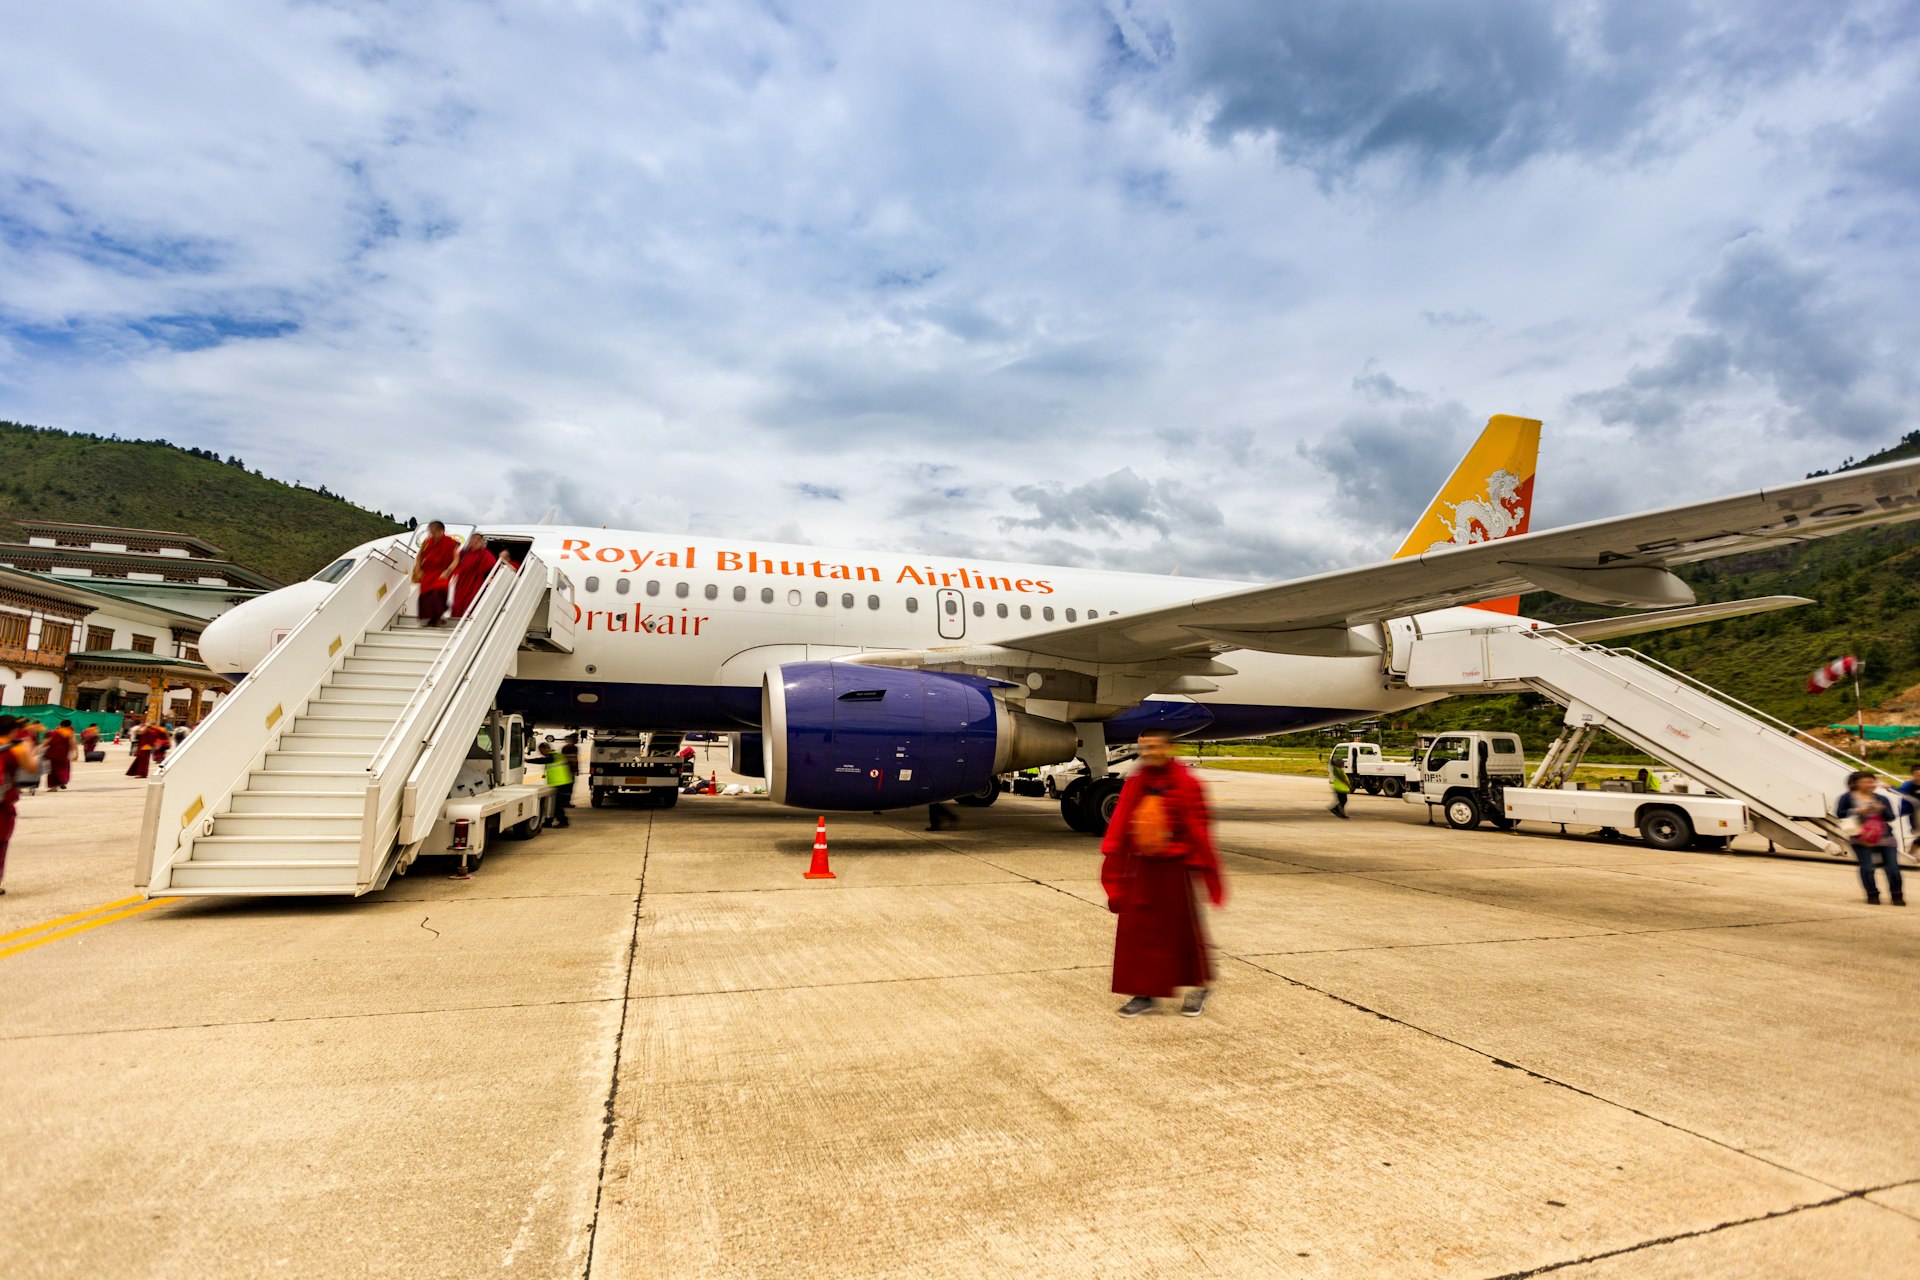 This daylight photo shows passengers arriving at Paro International Airport, Bhutan on a Royal Bhutan Airlines (Drukair) flight. The aircraft is an Airbus A319 with registration A5-JSW. A blur has been applied to all people in the photo. 